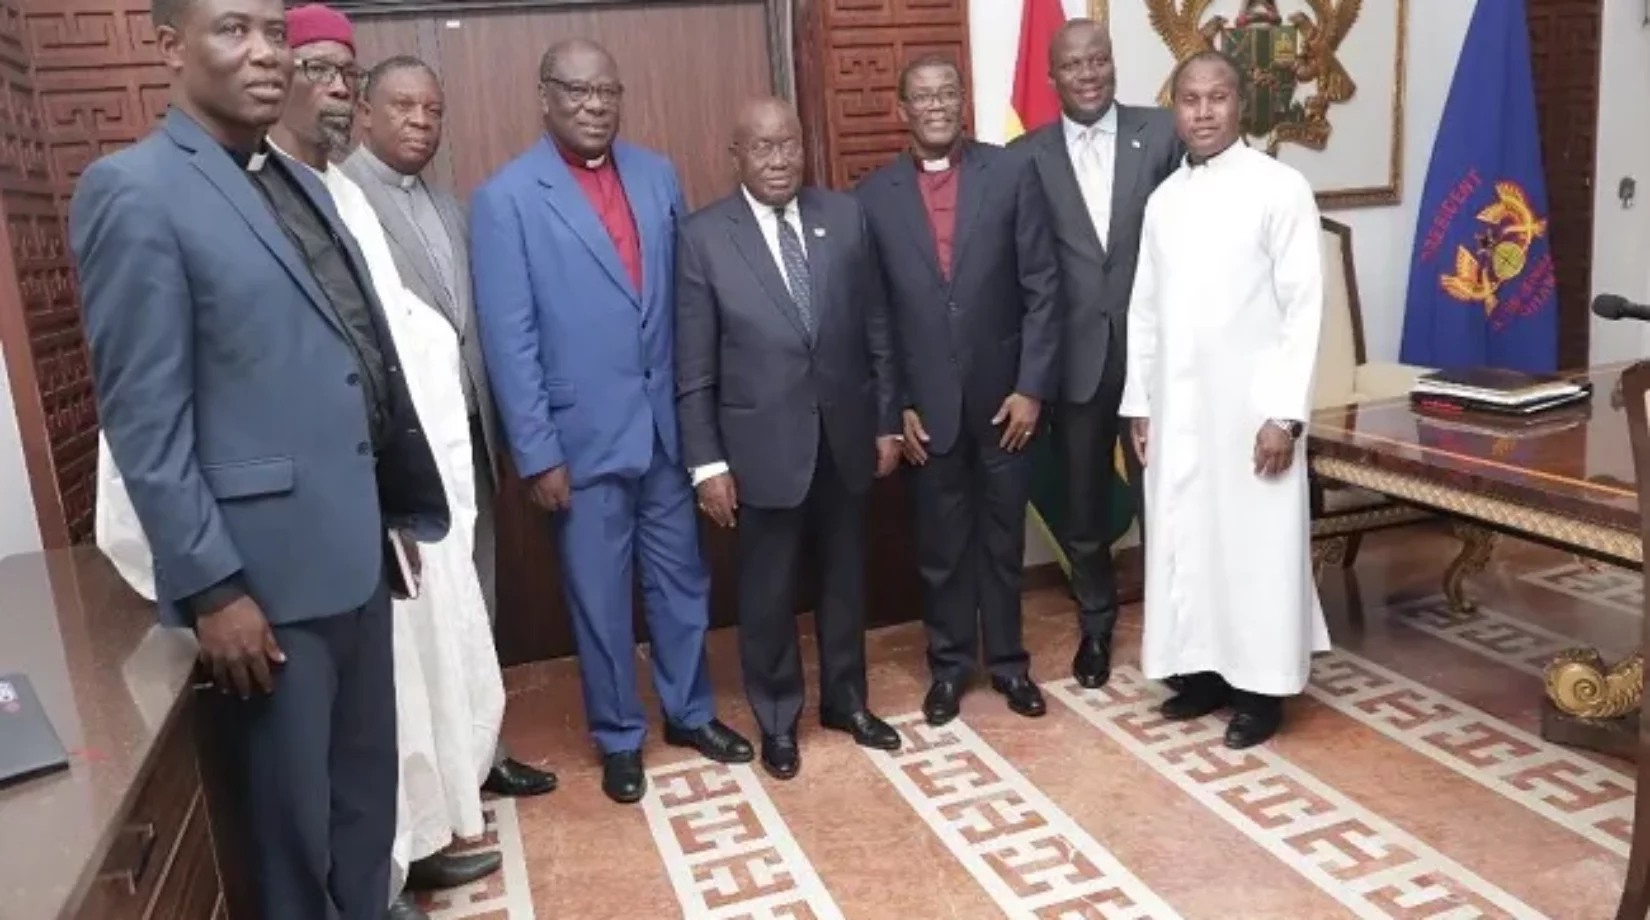 Ban small scale mining until galamsey solution is found-Religious Bodies urge Pres.Akufo-Addo